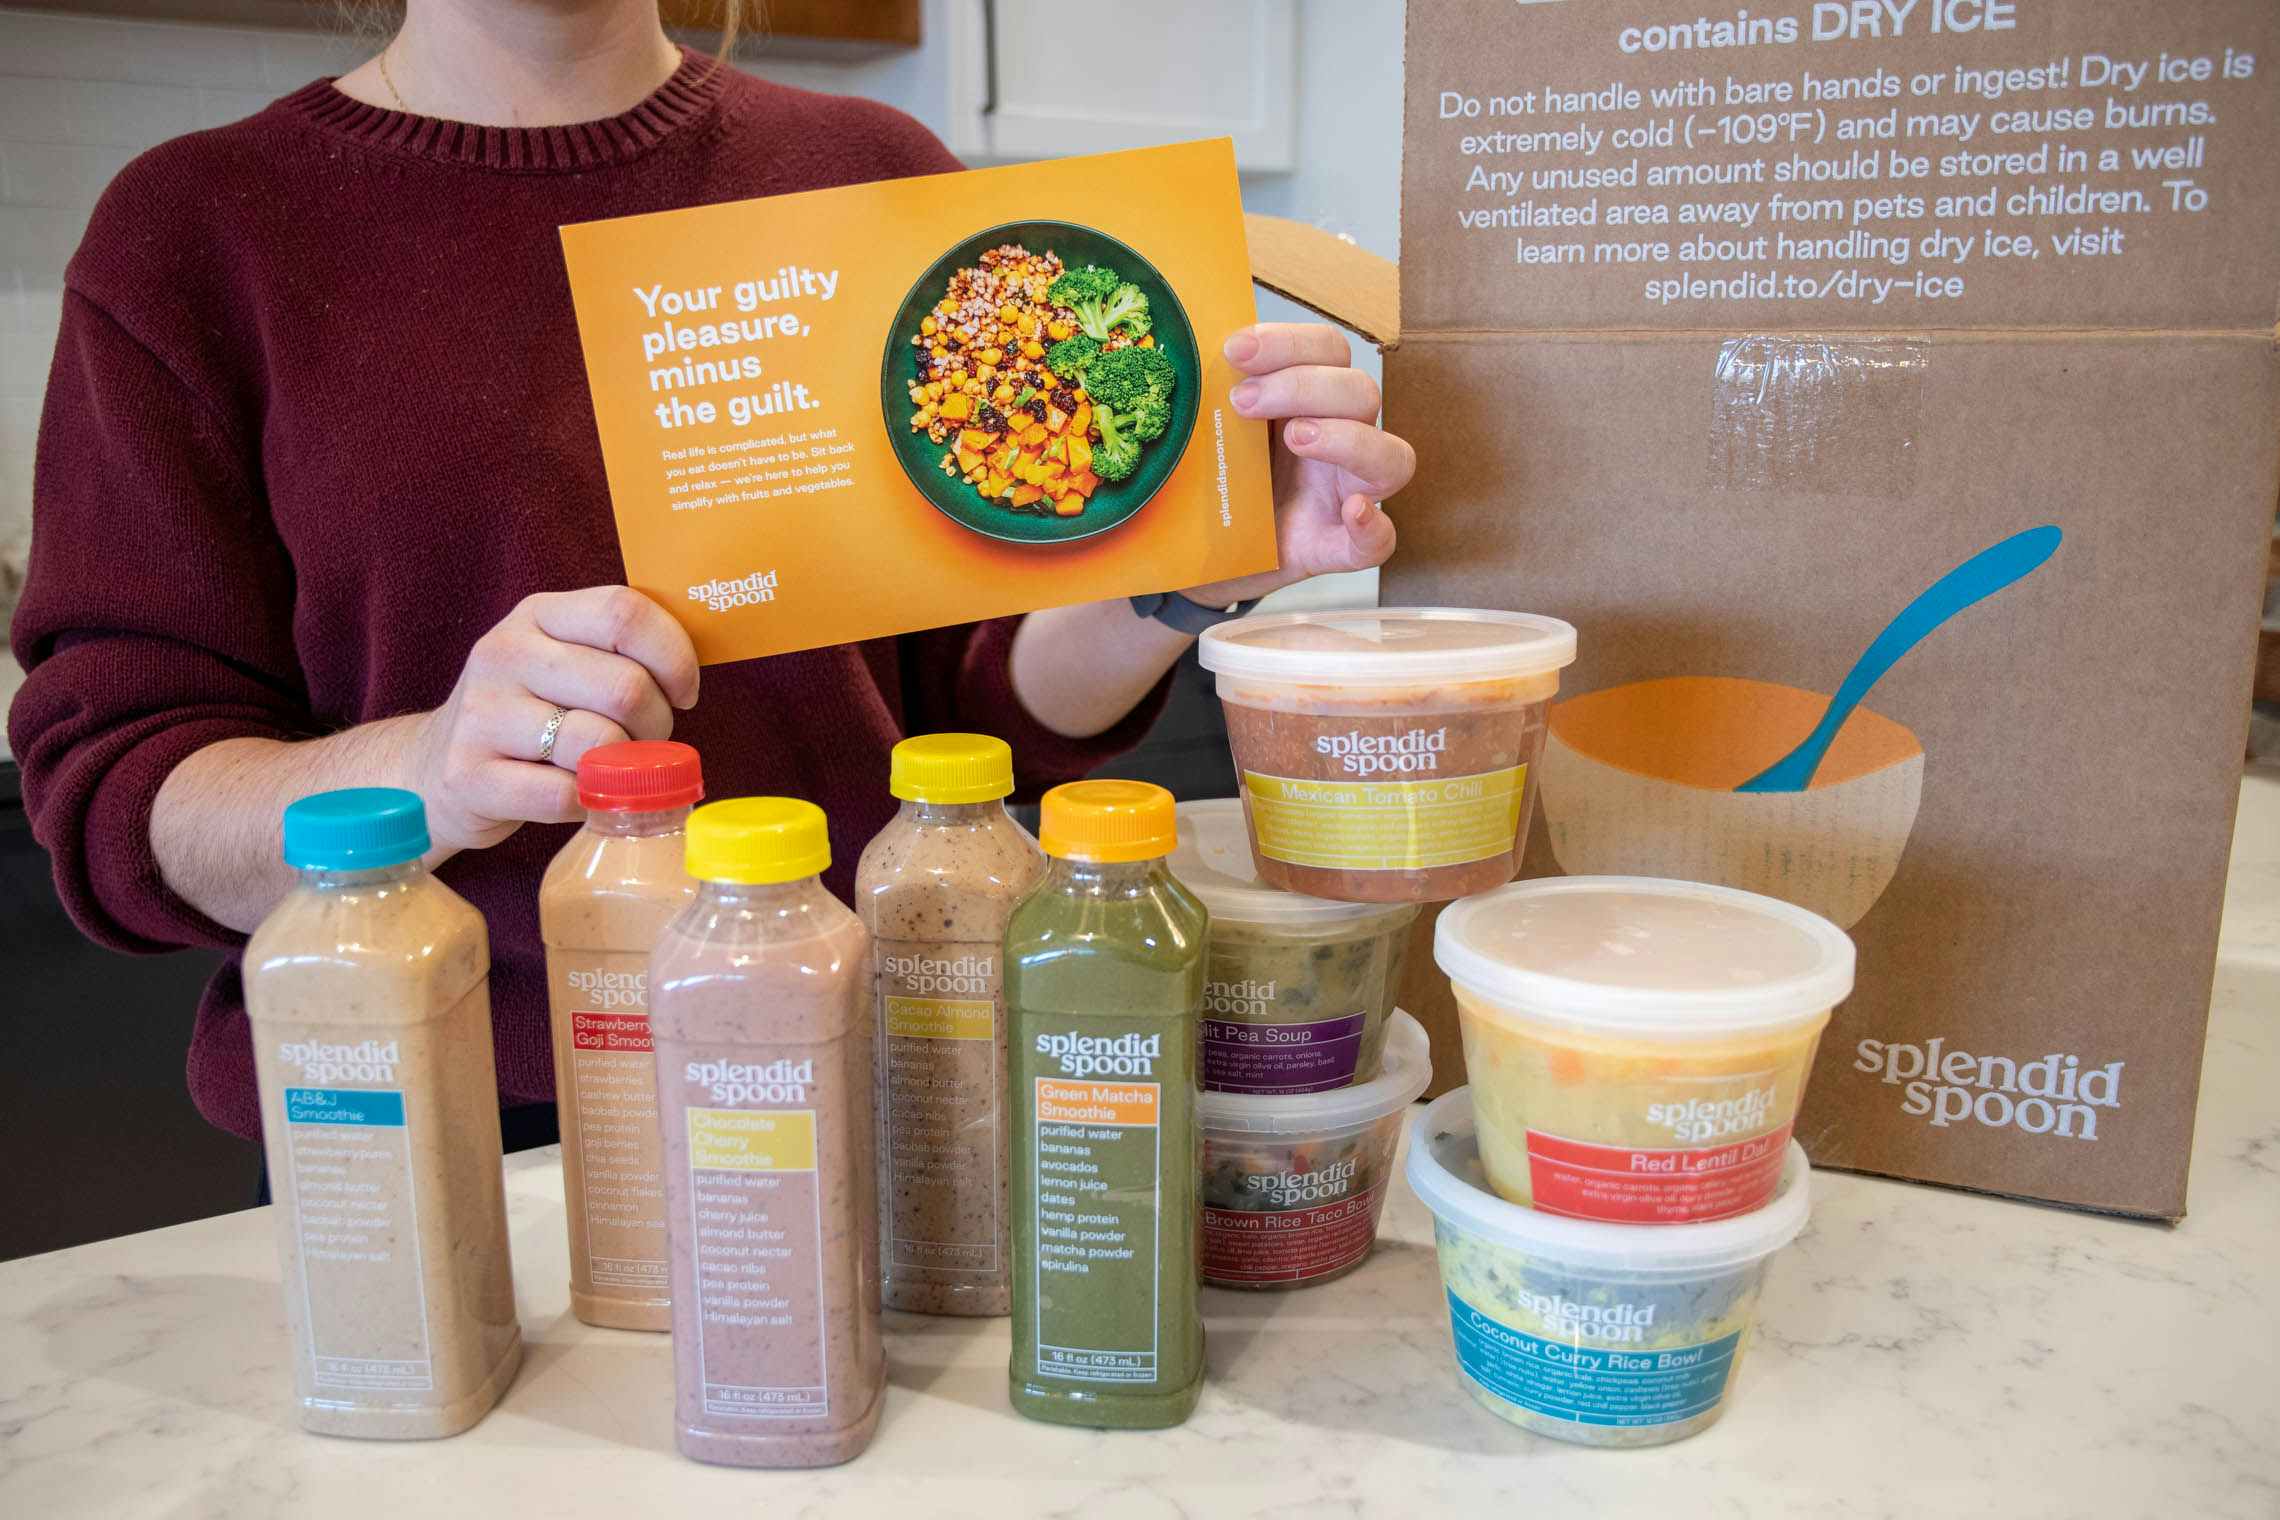 A woman unpacking the shakes and meal bowls from a Splendid Spoon meal kit box.